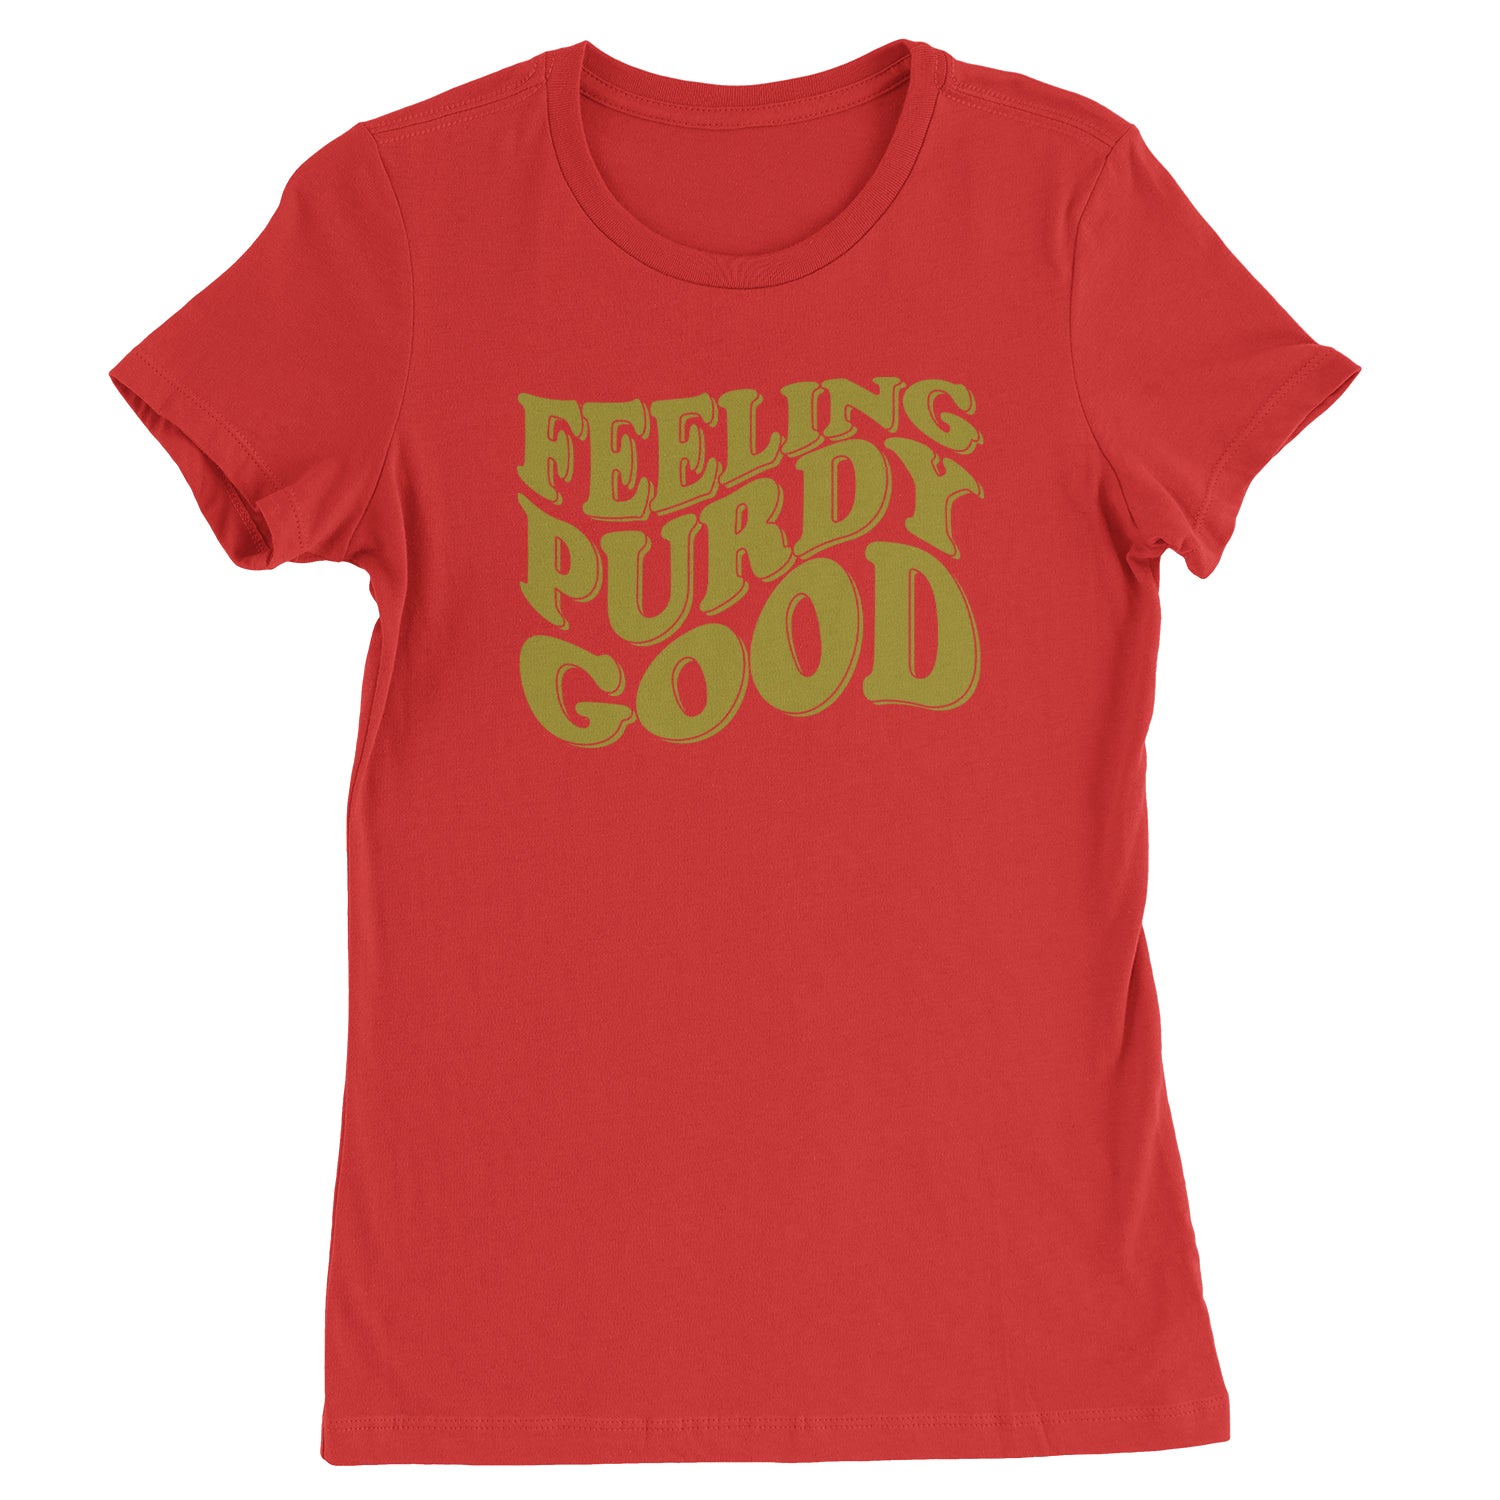 Feeling Purdy Good Womens T-shirt 13, football by Expression Tees